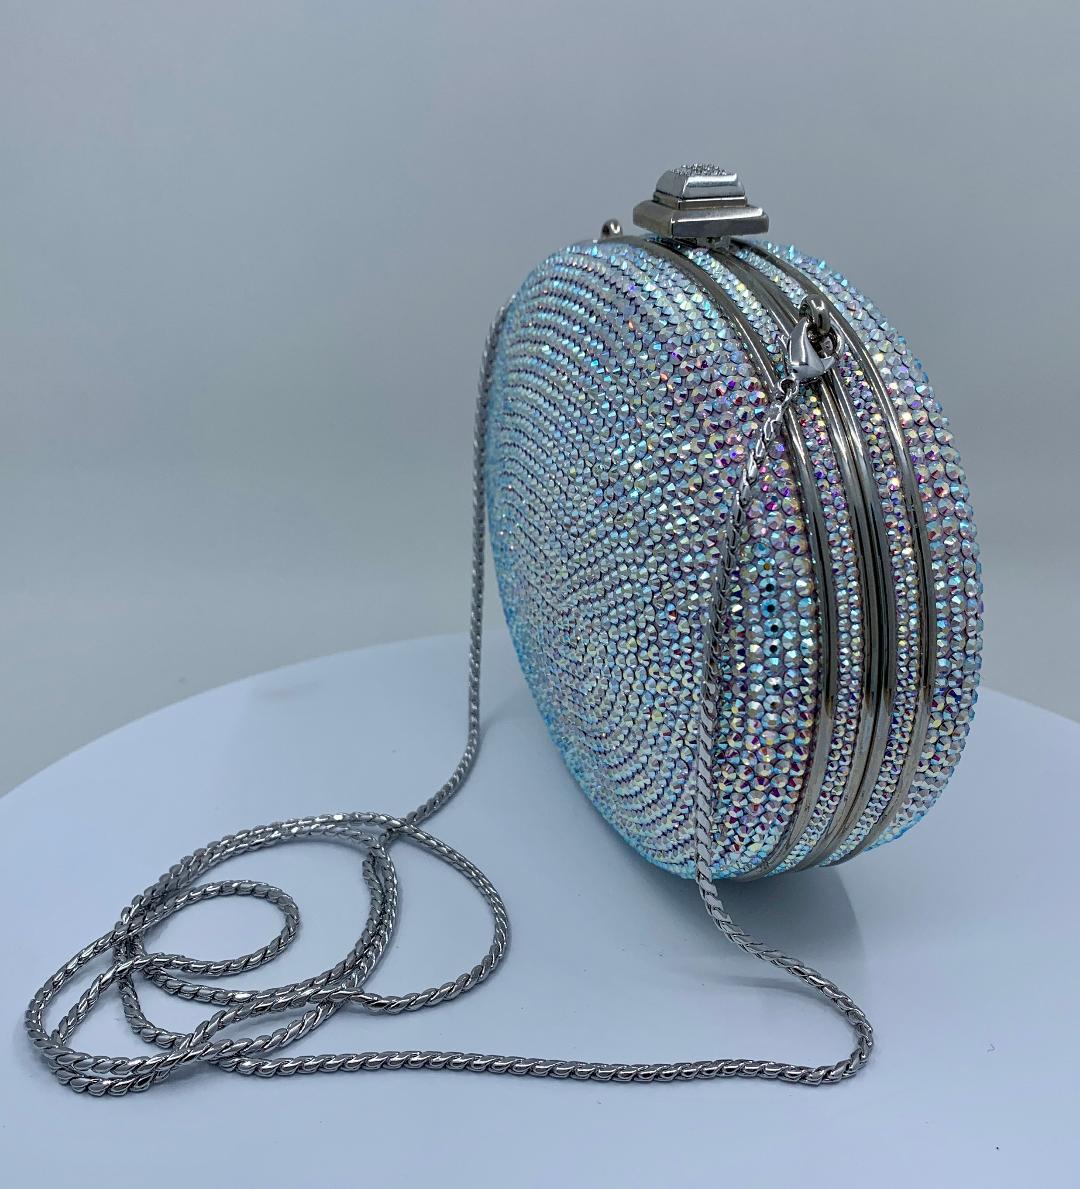 Shimmering Judith Leiber Oval Shaped Opalescent Crystal Miniaudiere Evening Bag 1